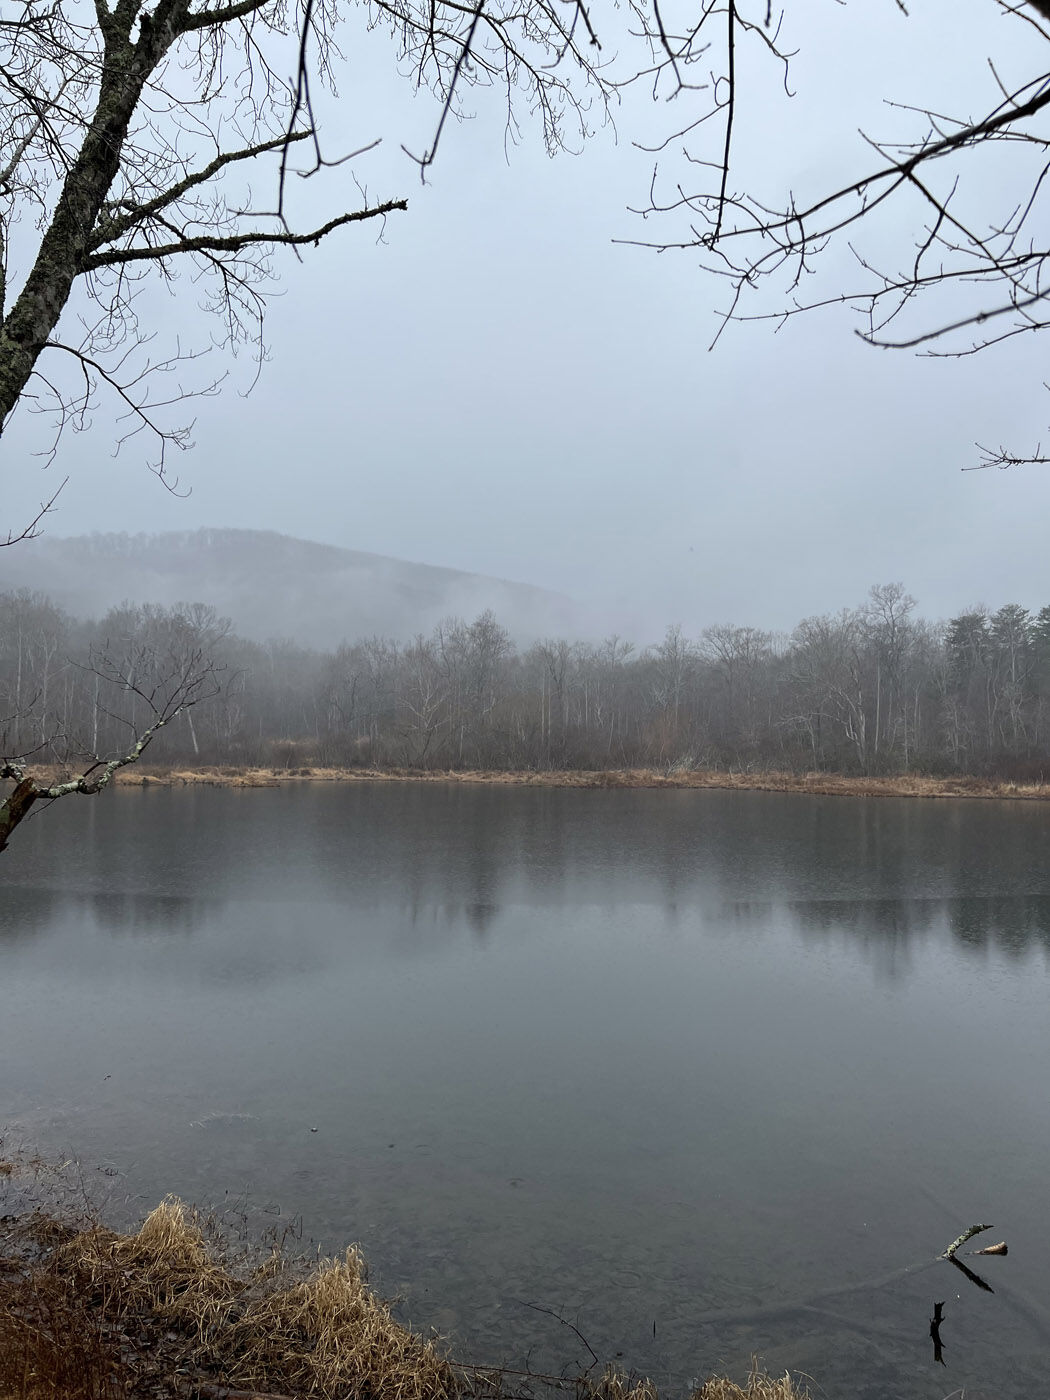 WNC Afield: Twin Ponds Trail may just 'bless your heart'